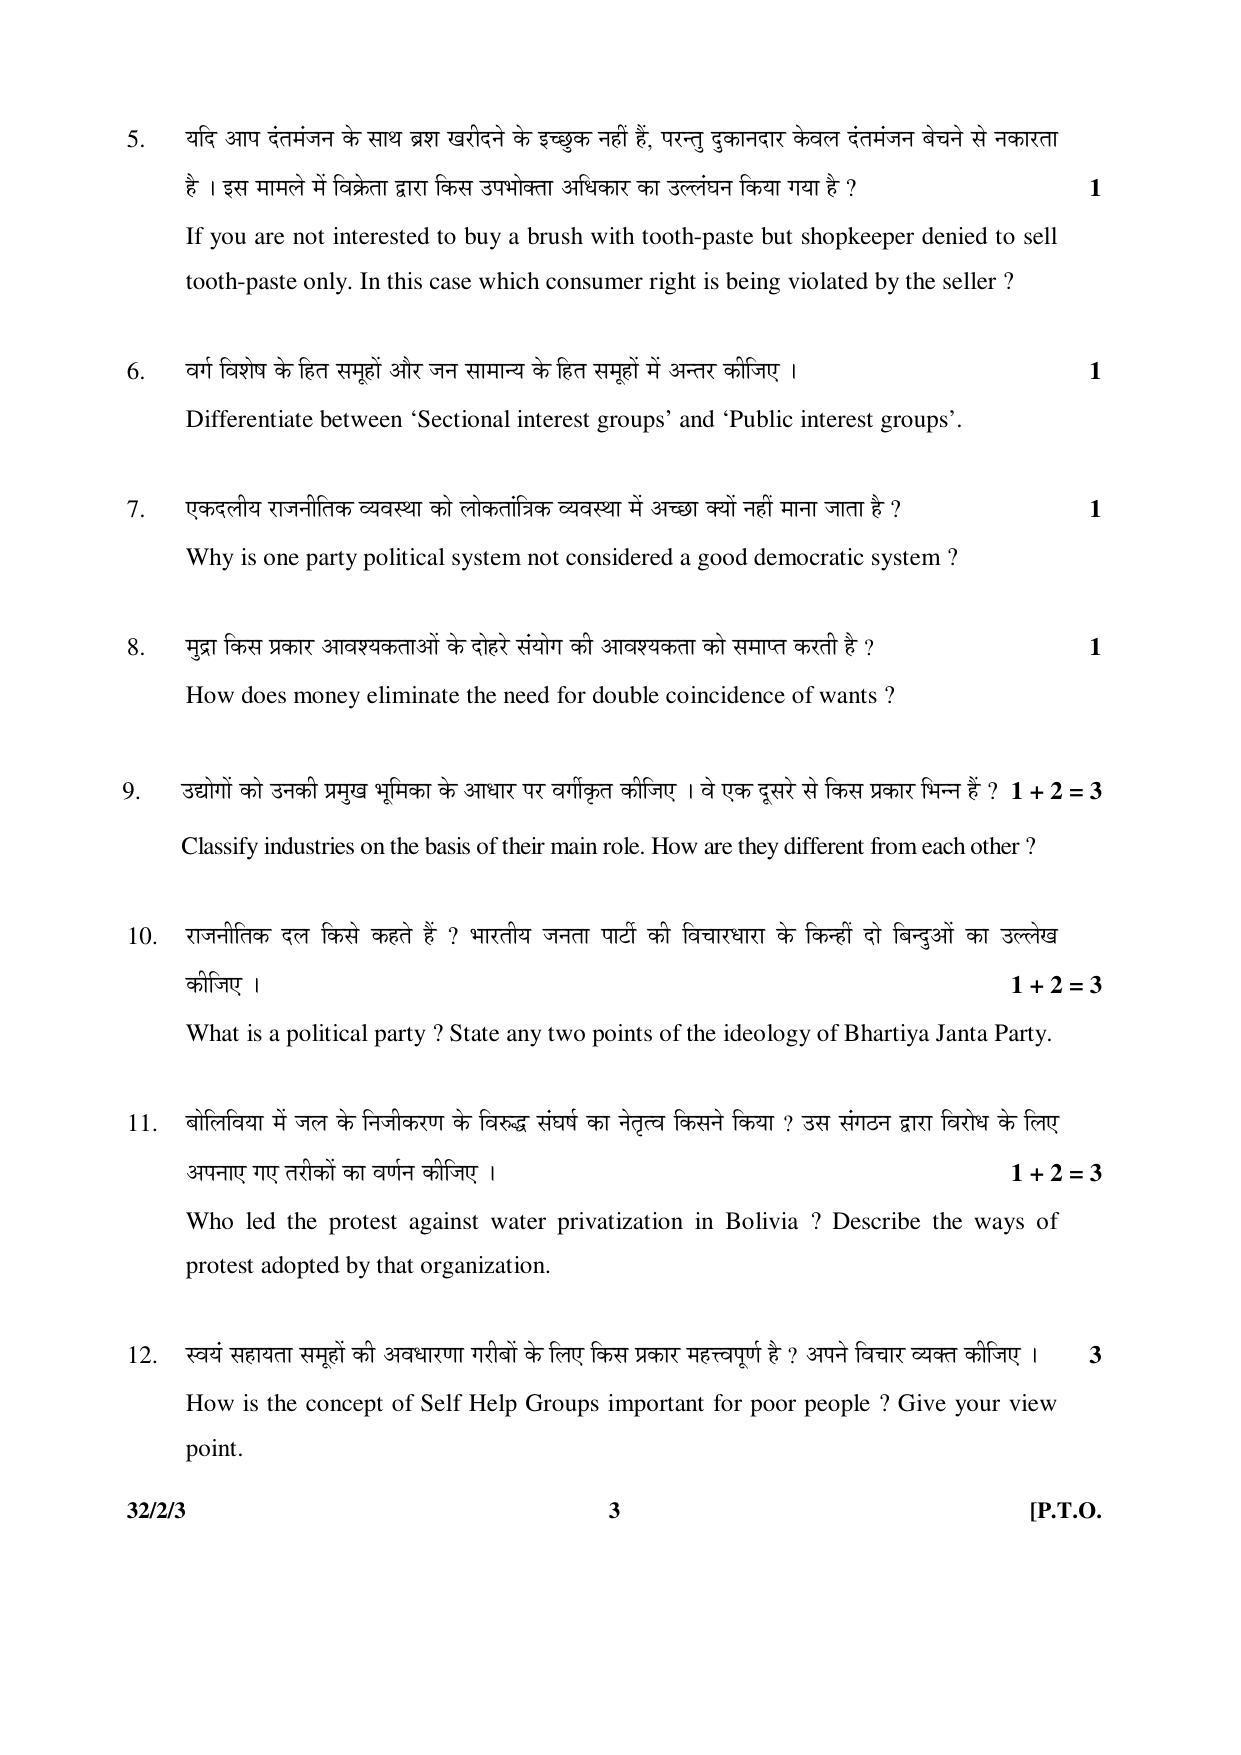 CBSE Class 10 32-2-3 _Social Science 2016 Question Paper - Page 3